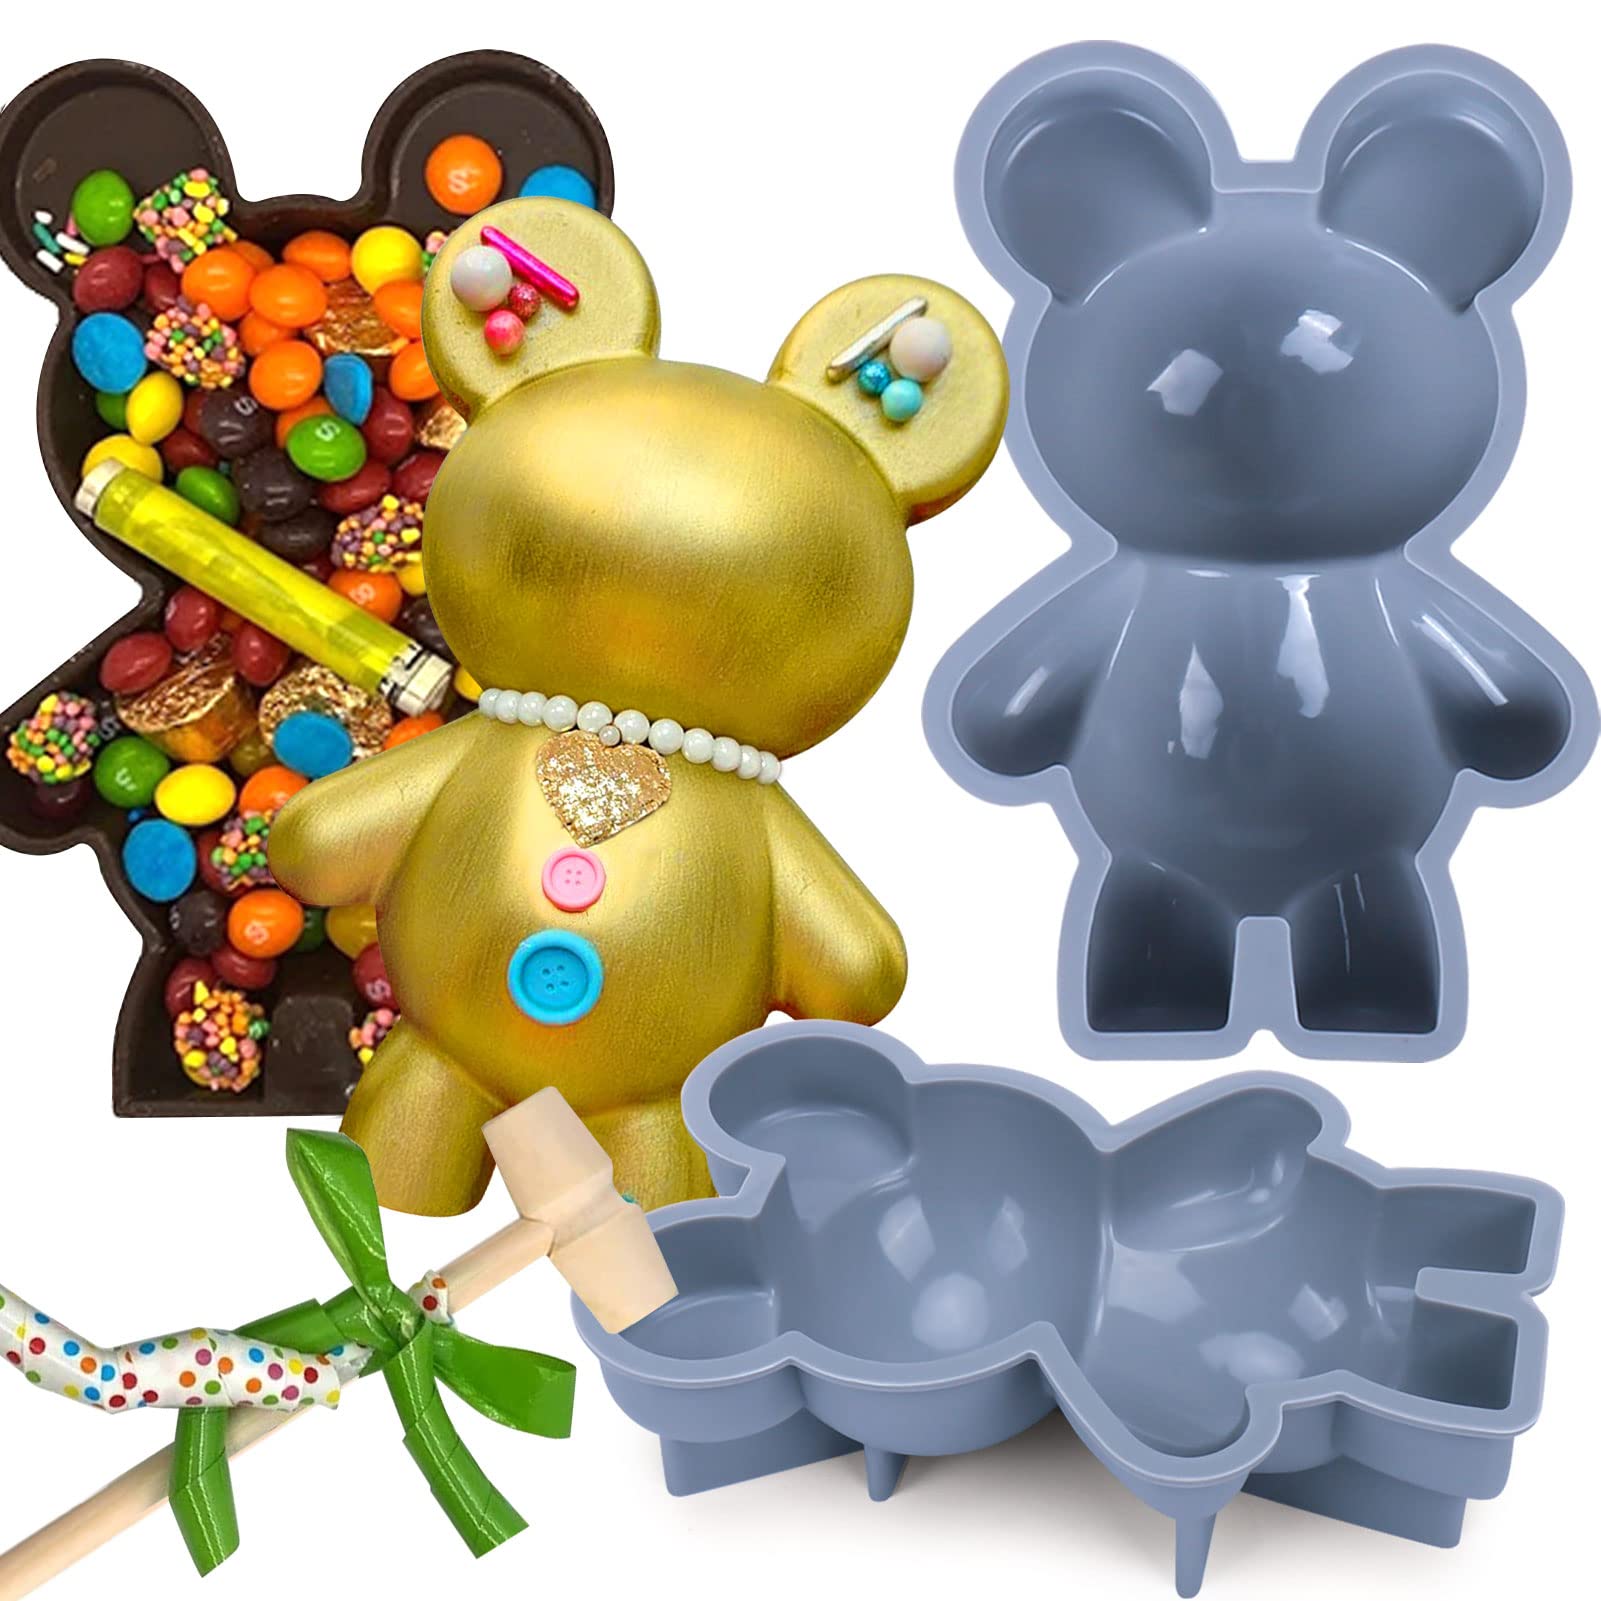 AIERSA Bear Chocolate Silicone Molds, 2Pcs 3D Teddy Bear Breakable Mold with Hammer for Smash Bears, Candy Molds,Mousse Cake, Dessert Baking,Jello, Big Gummy Bear, Birthday Valentines Day